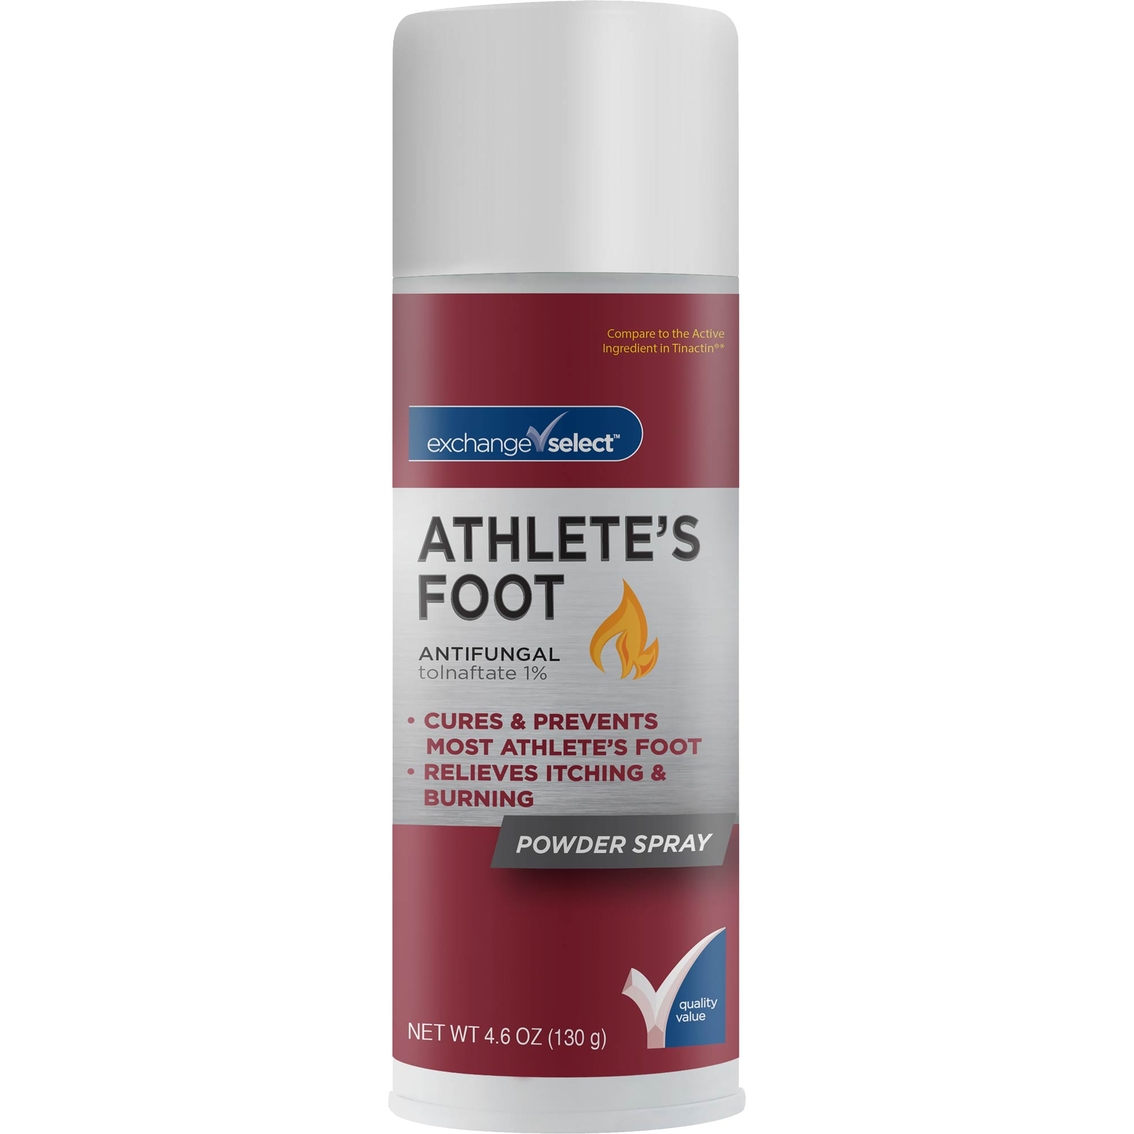 Athlete's Foot Cure — Prevention Foot Powder